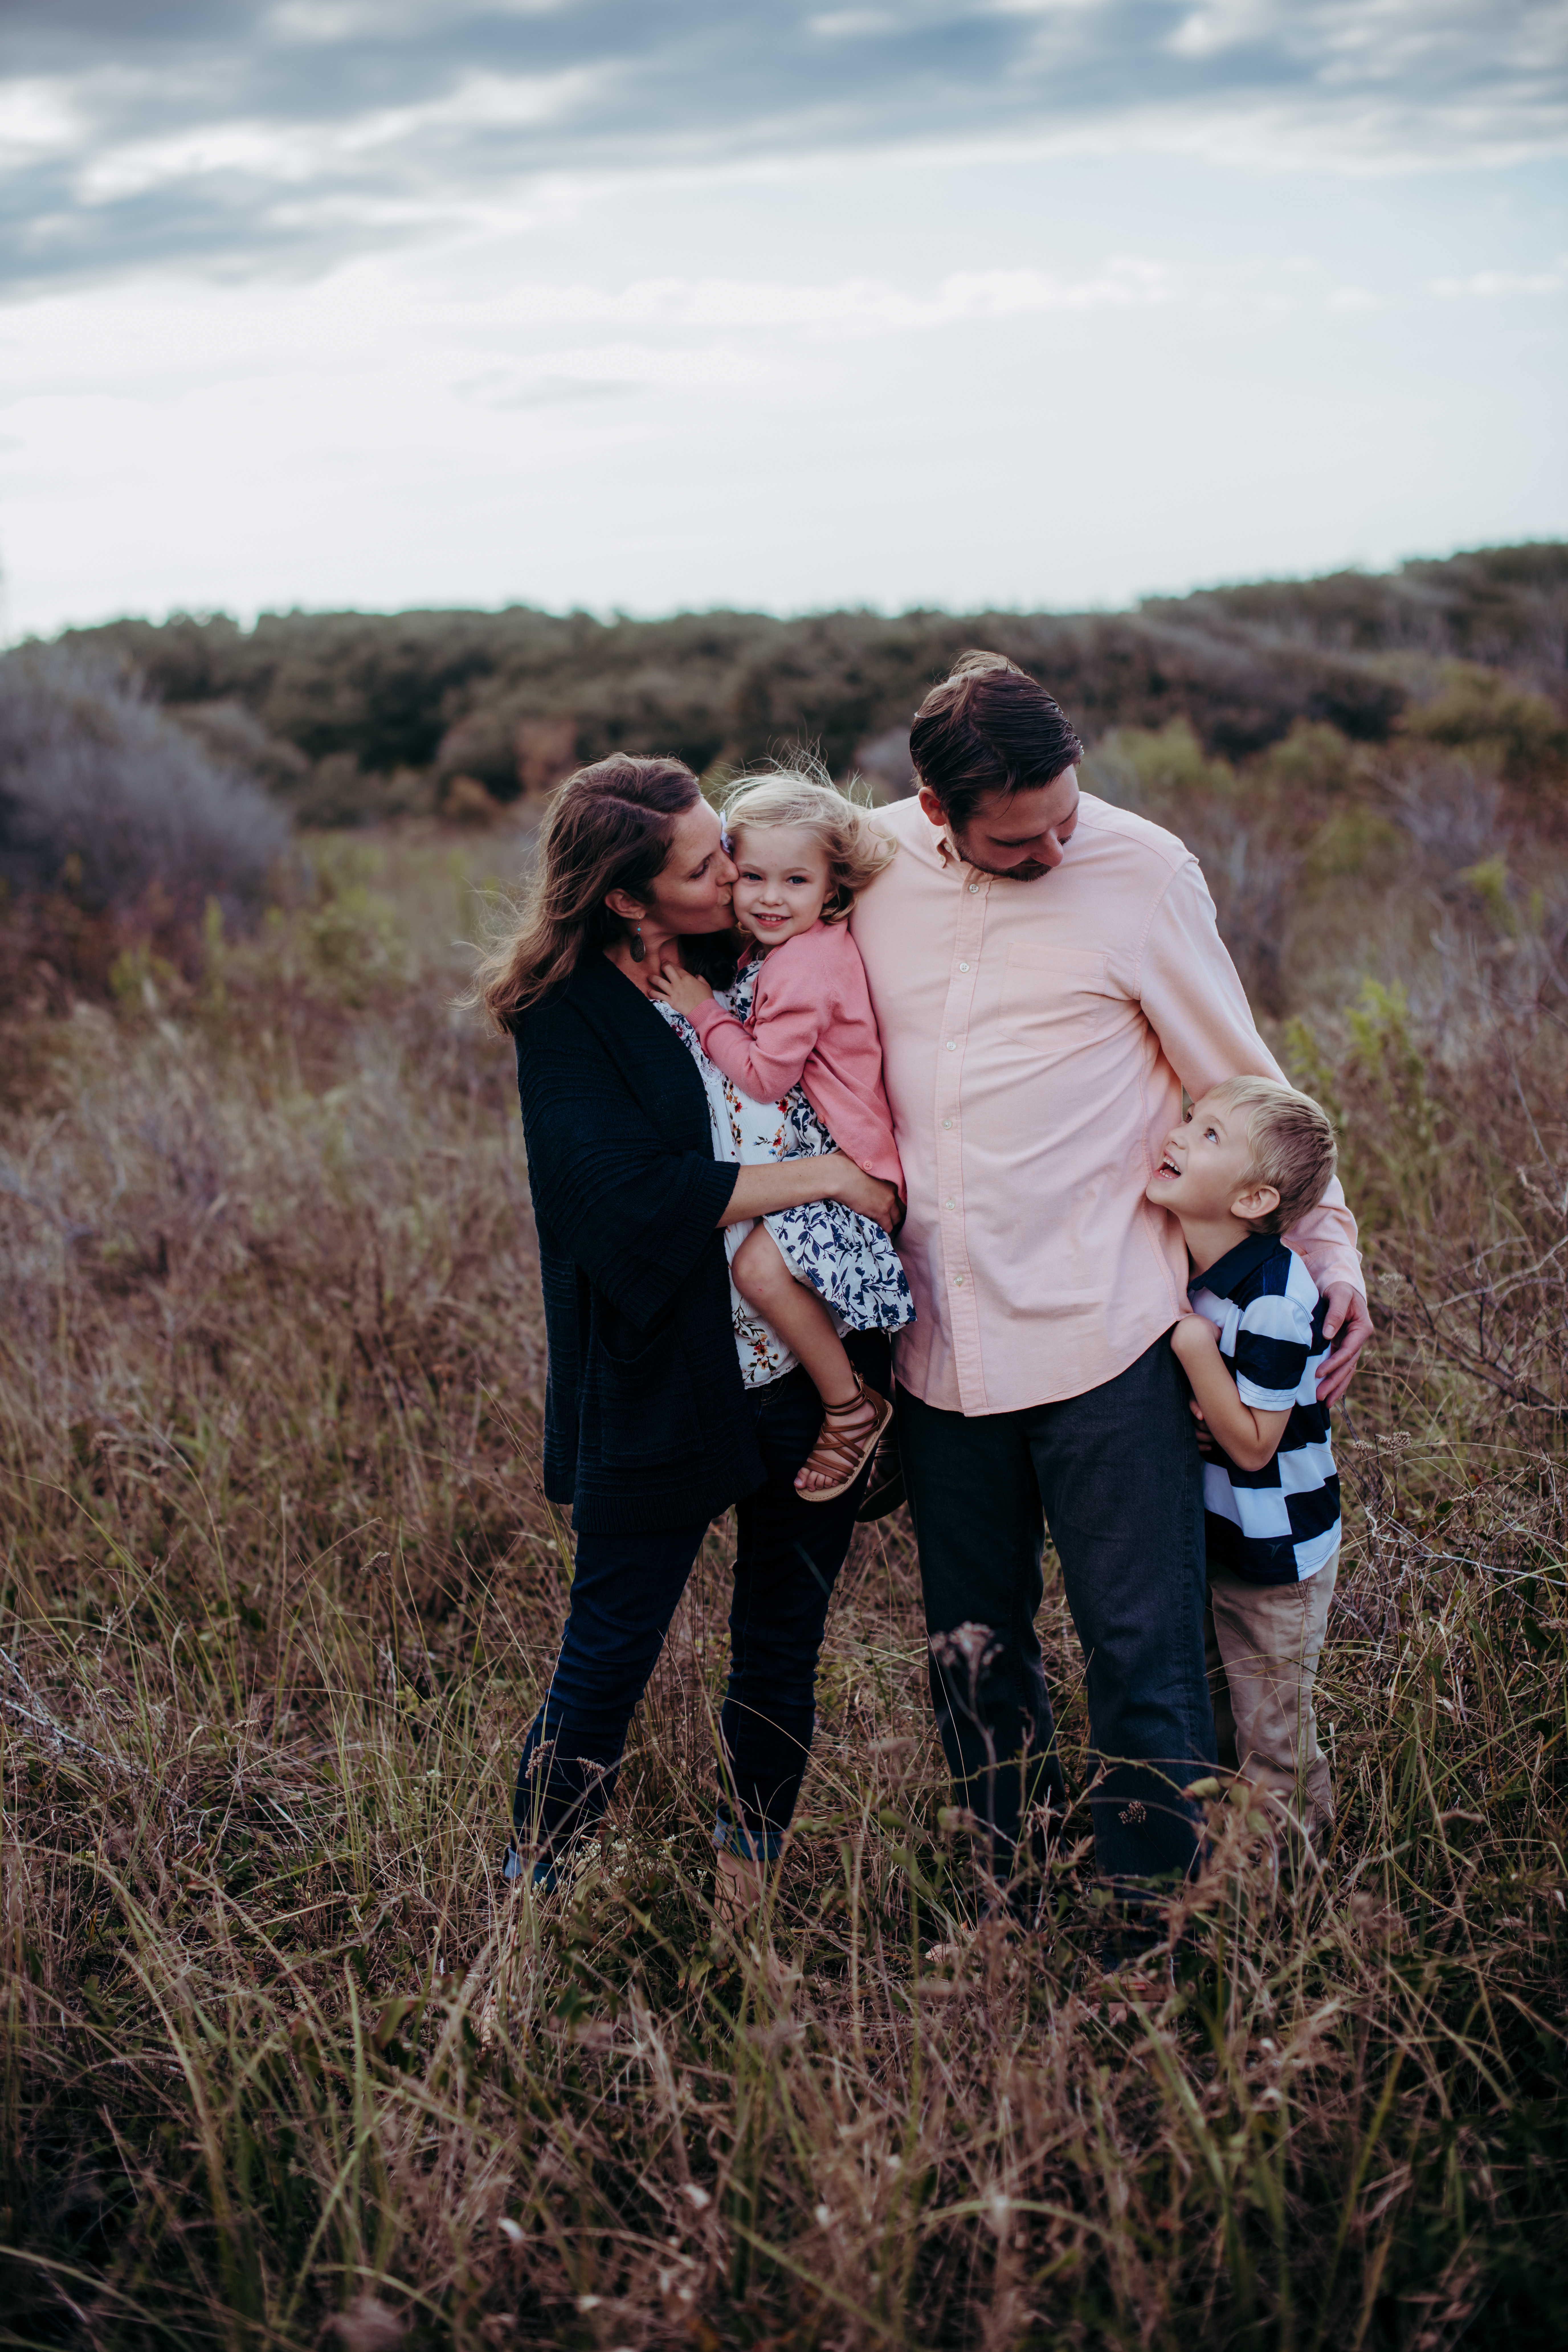 sweet family photo in a field of beach grass by laura walter photography